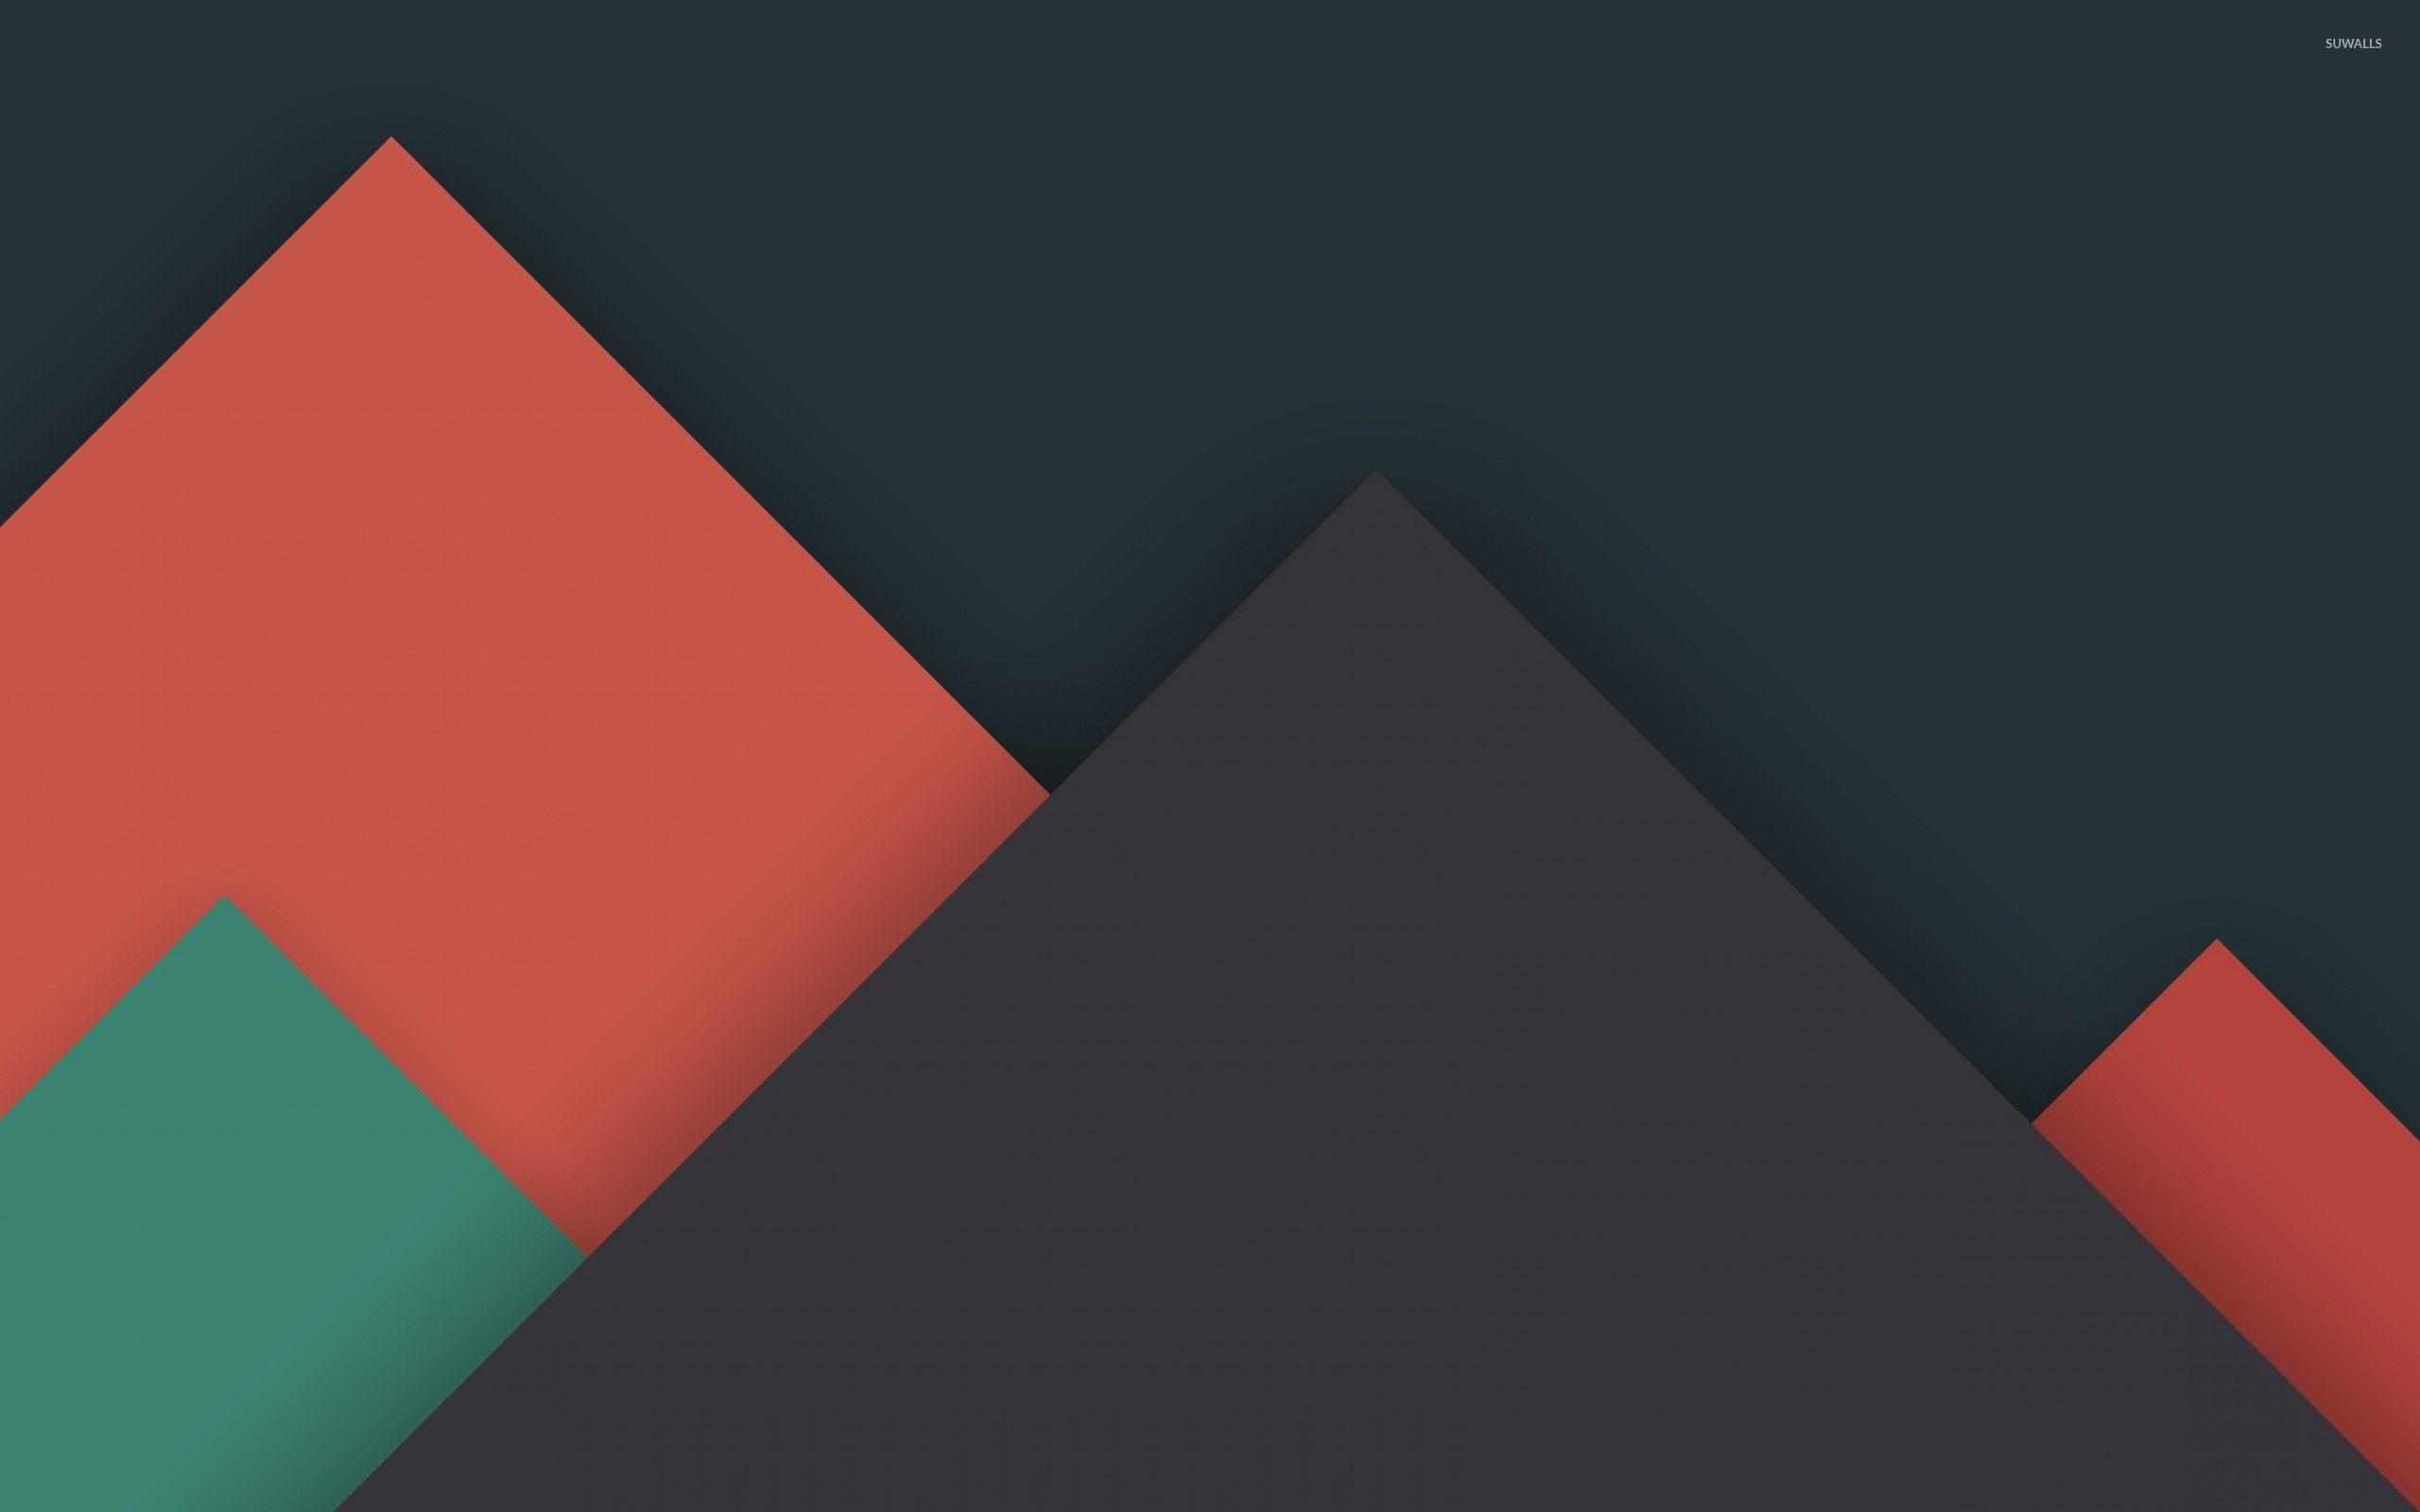 geometric abstract shapes wallpaper